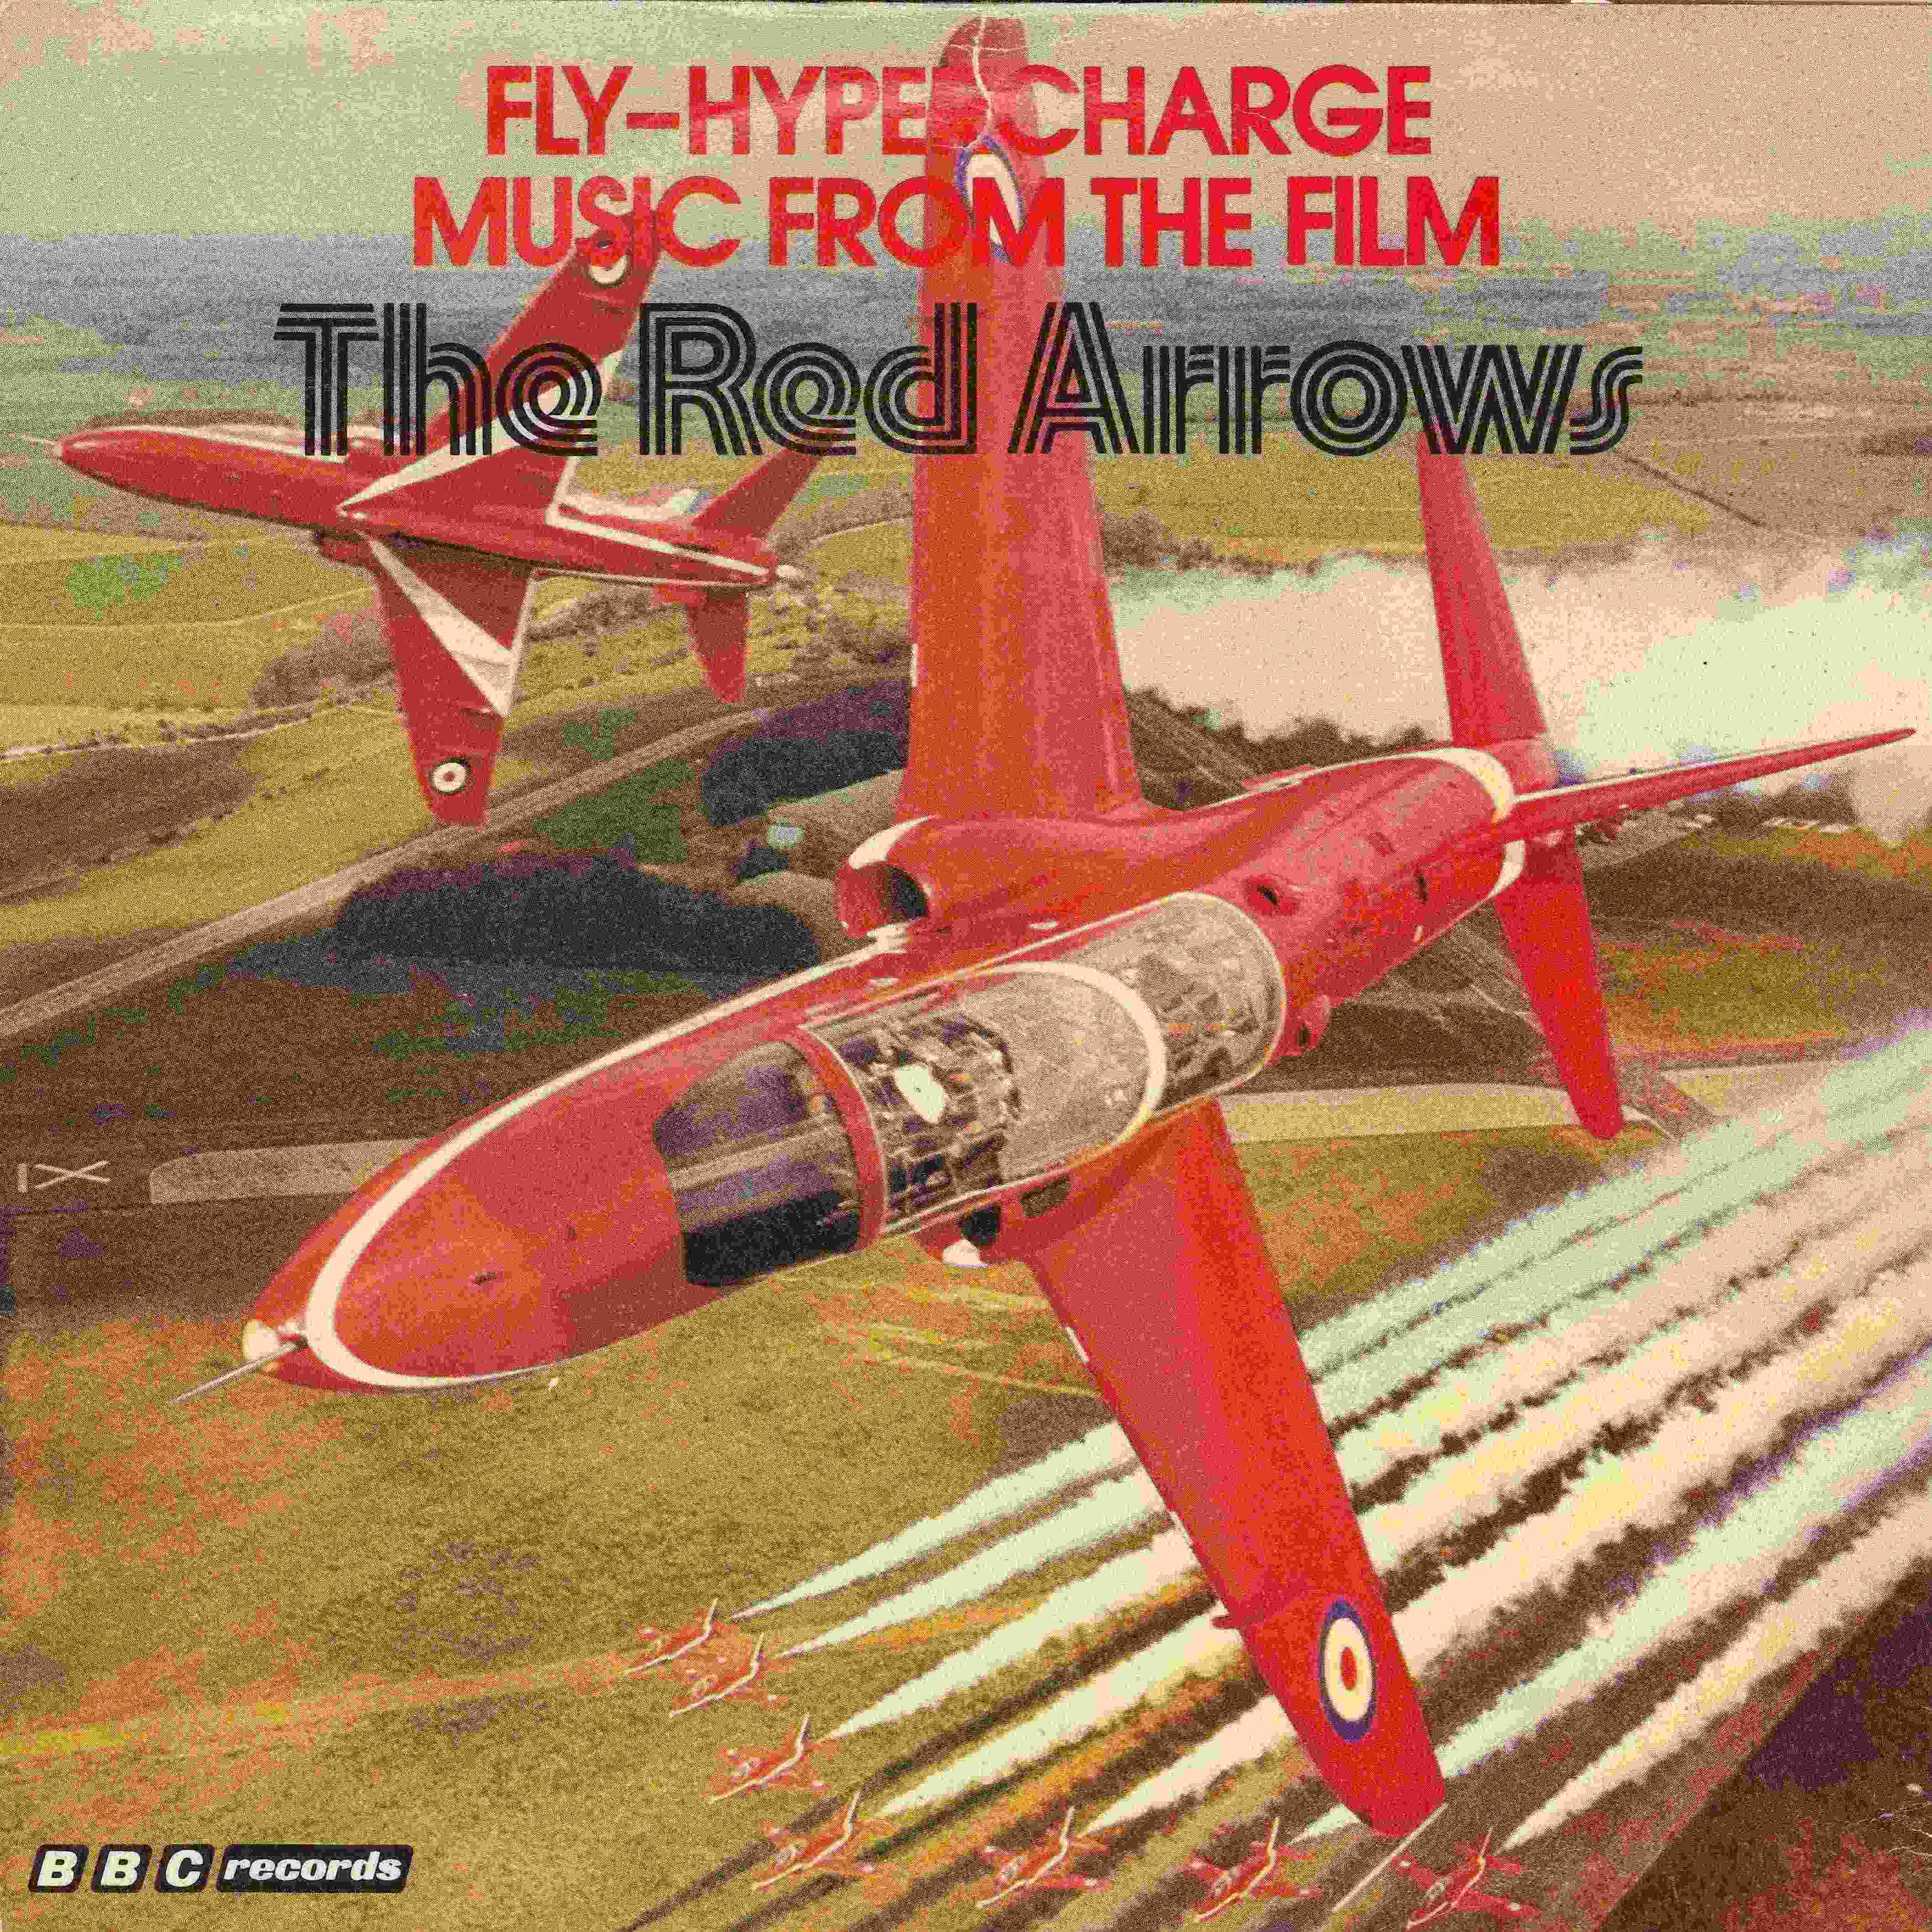 Picture of RESL 95 Fly (The Red Arrows) by artist Dittrica / Ironton / Monkman / The O. D. S. Band from the BBC singles - Records and Tapes library